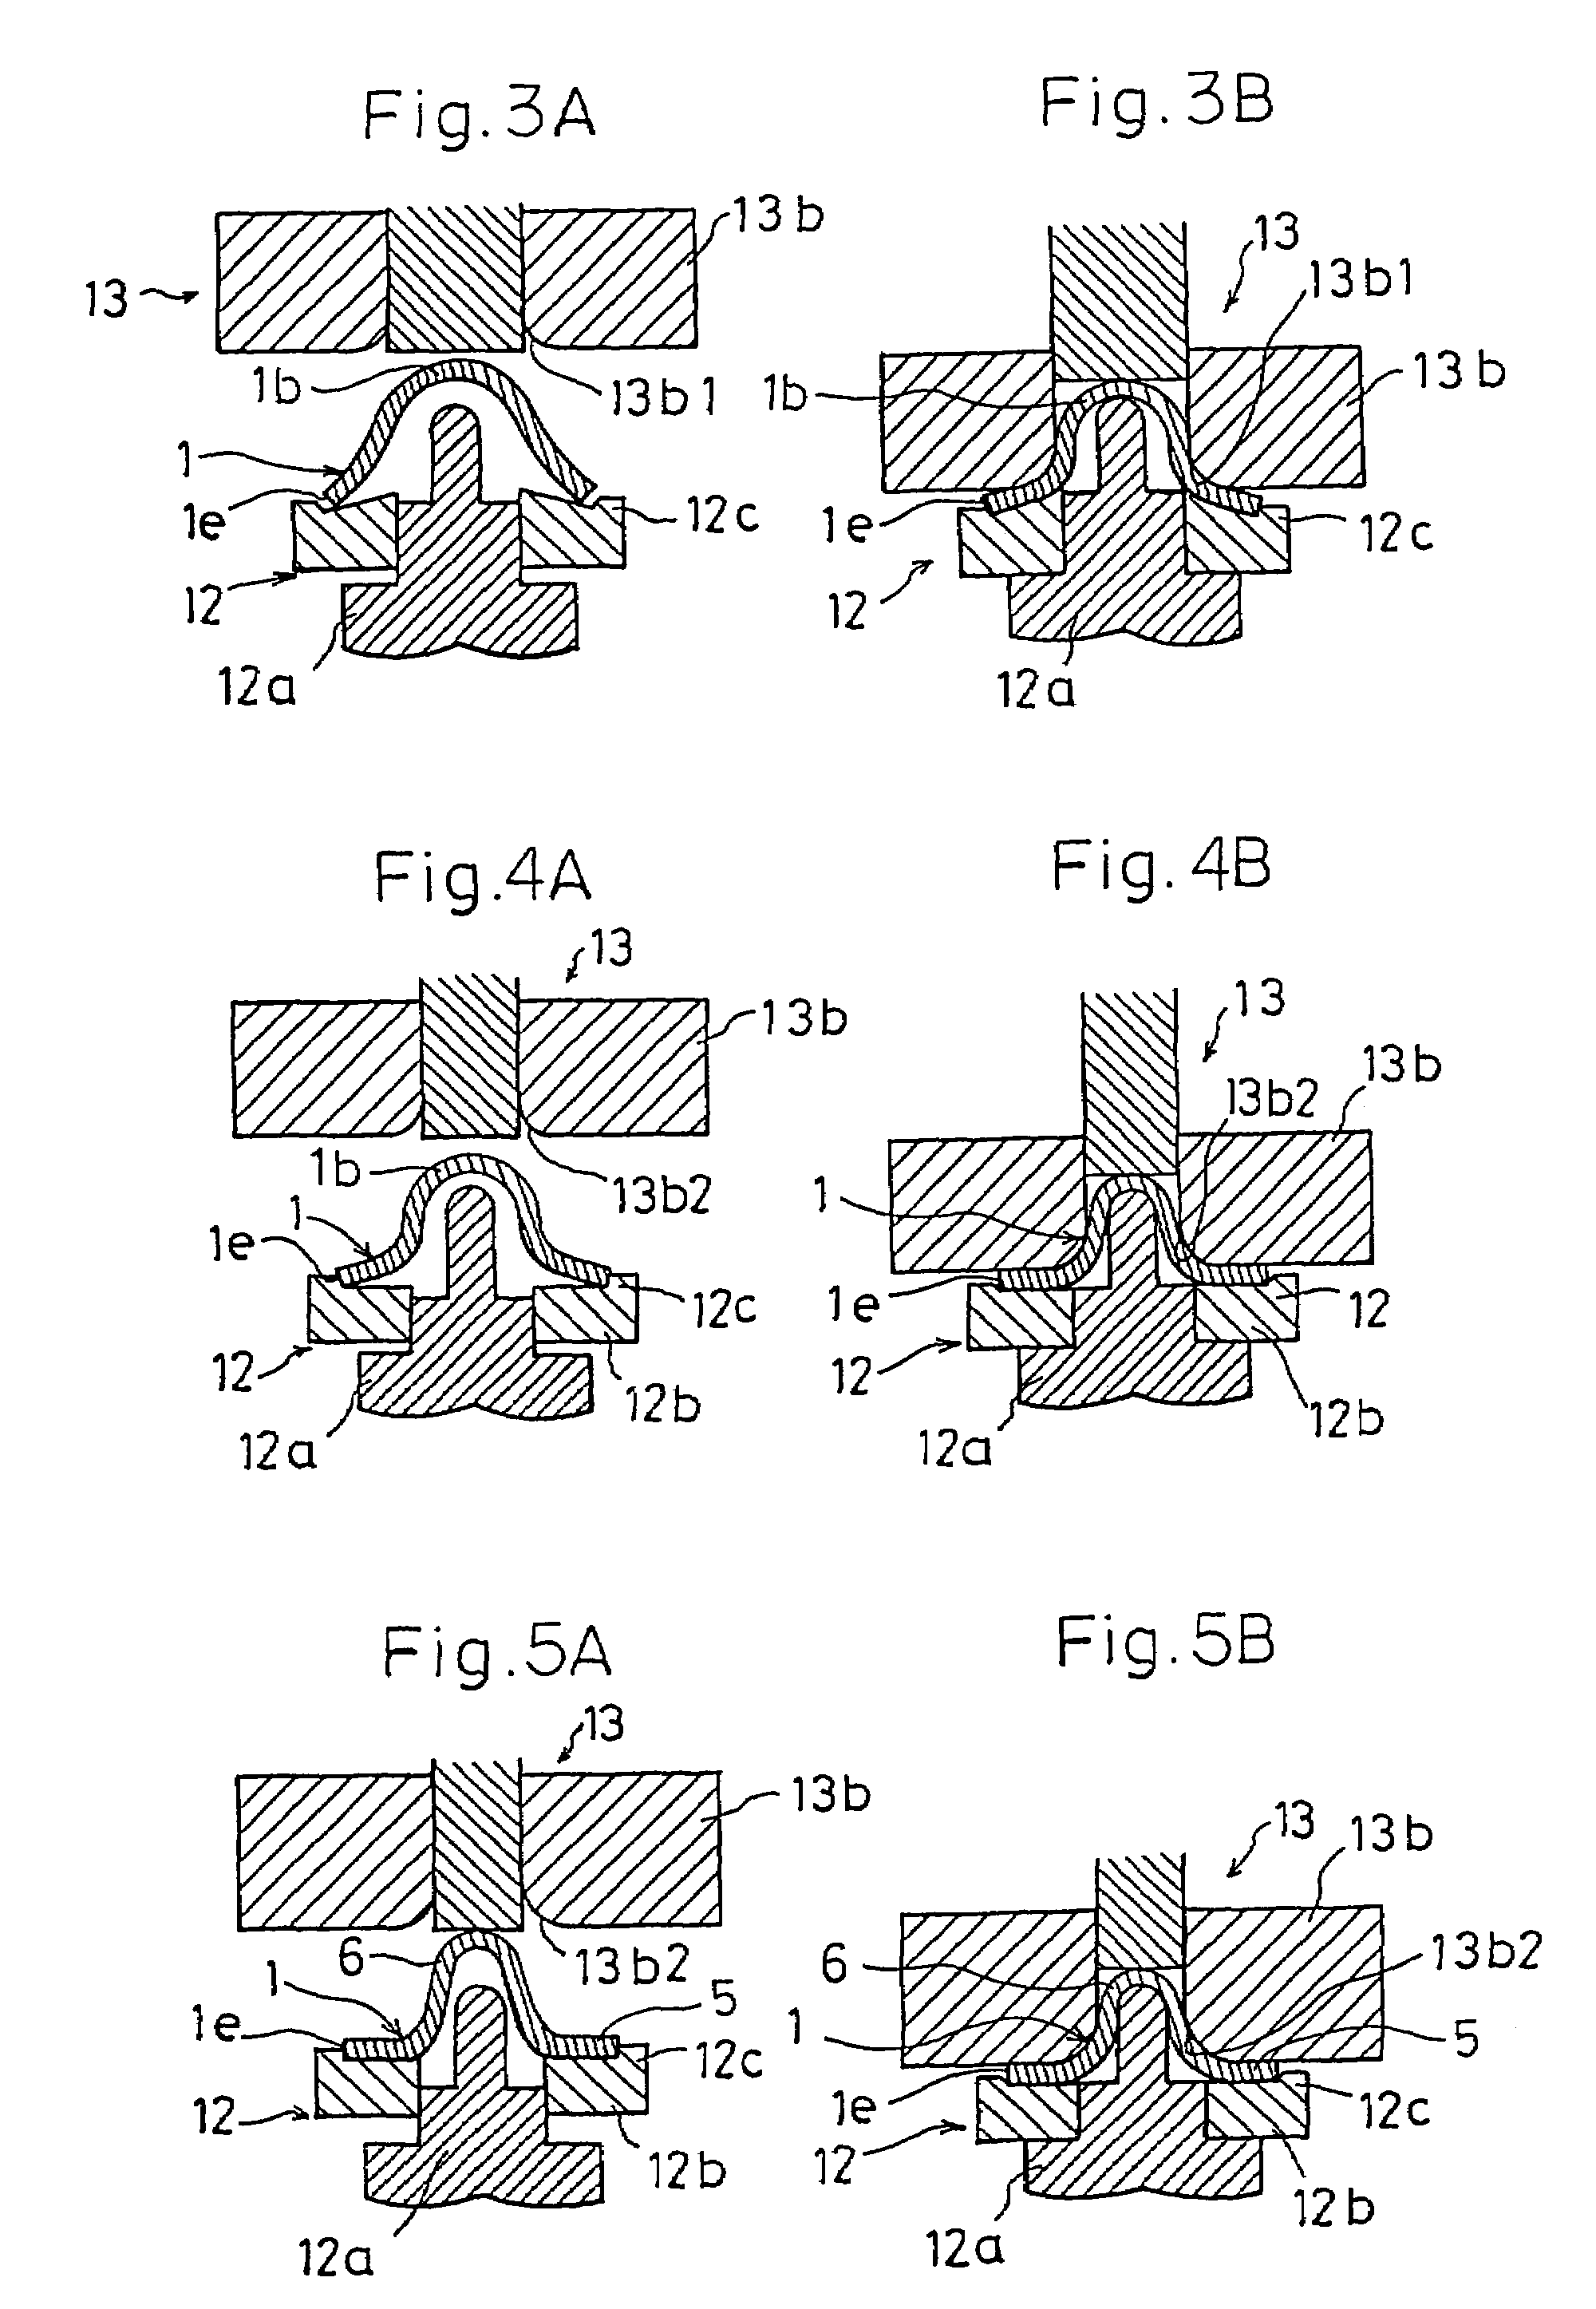 Method of producing a rotary member made of a metallic plate